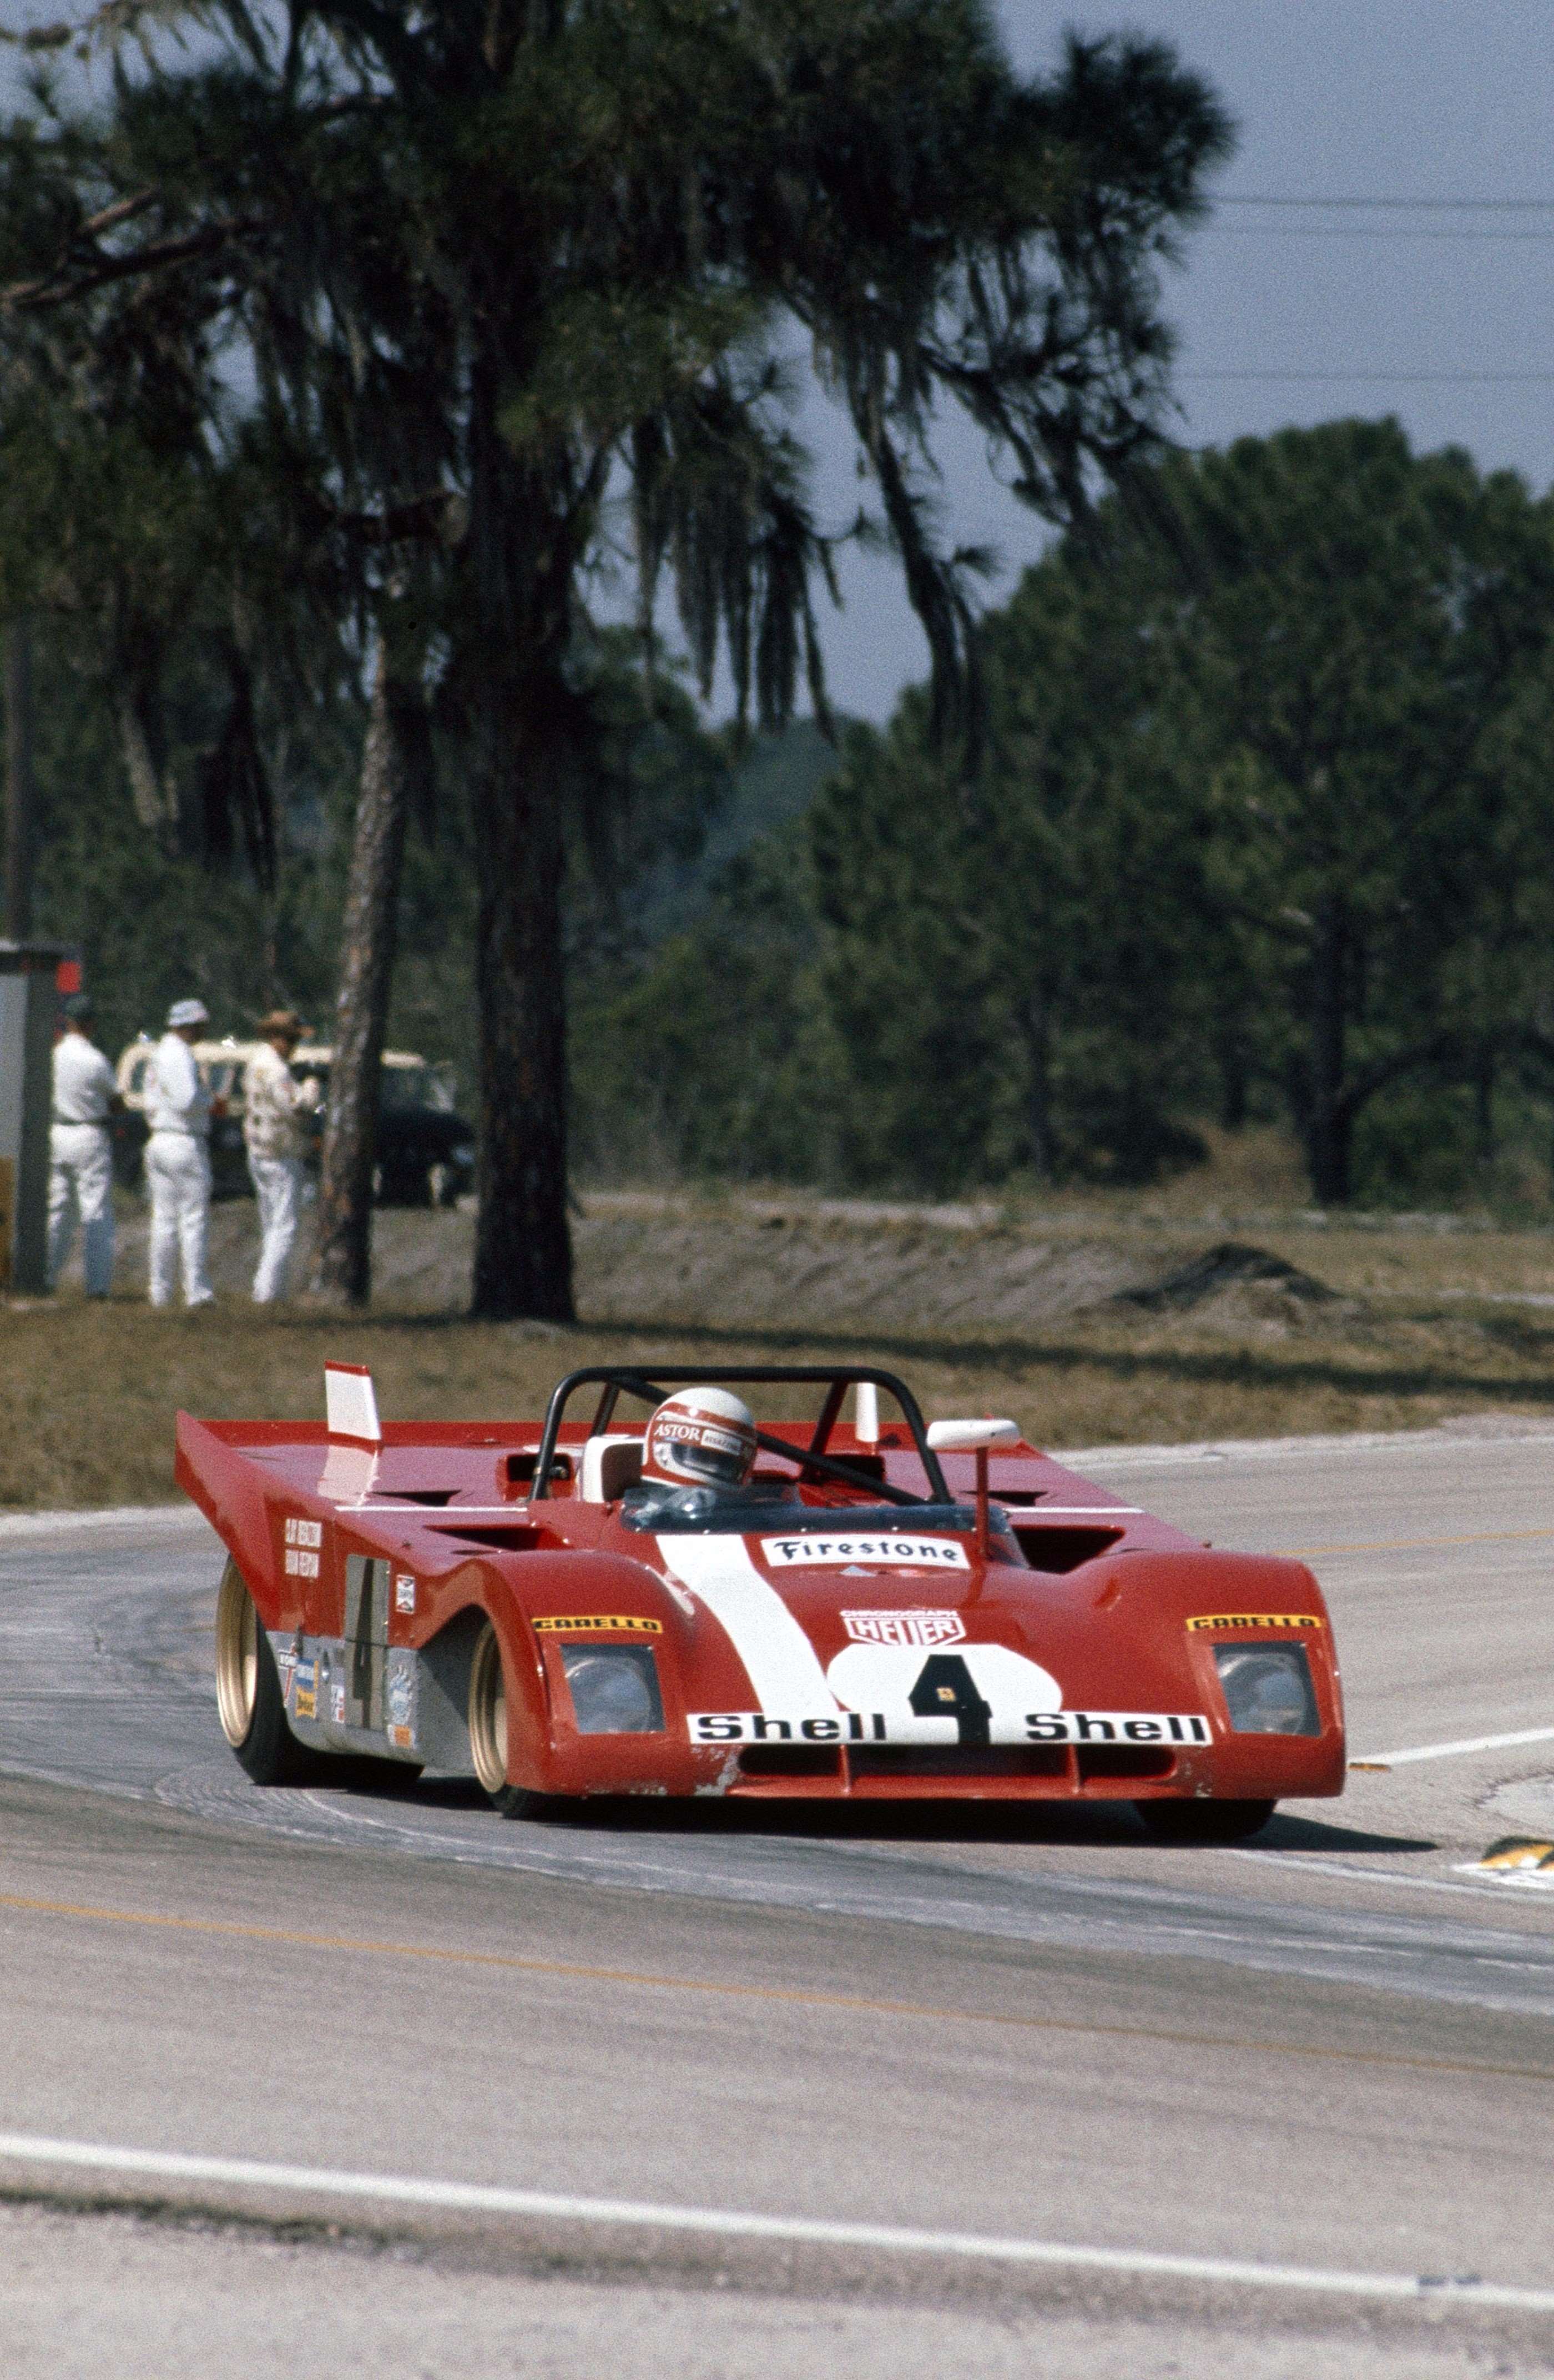 Regazzoni/Redman 312 in action a month later at Sebring.